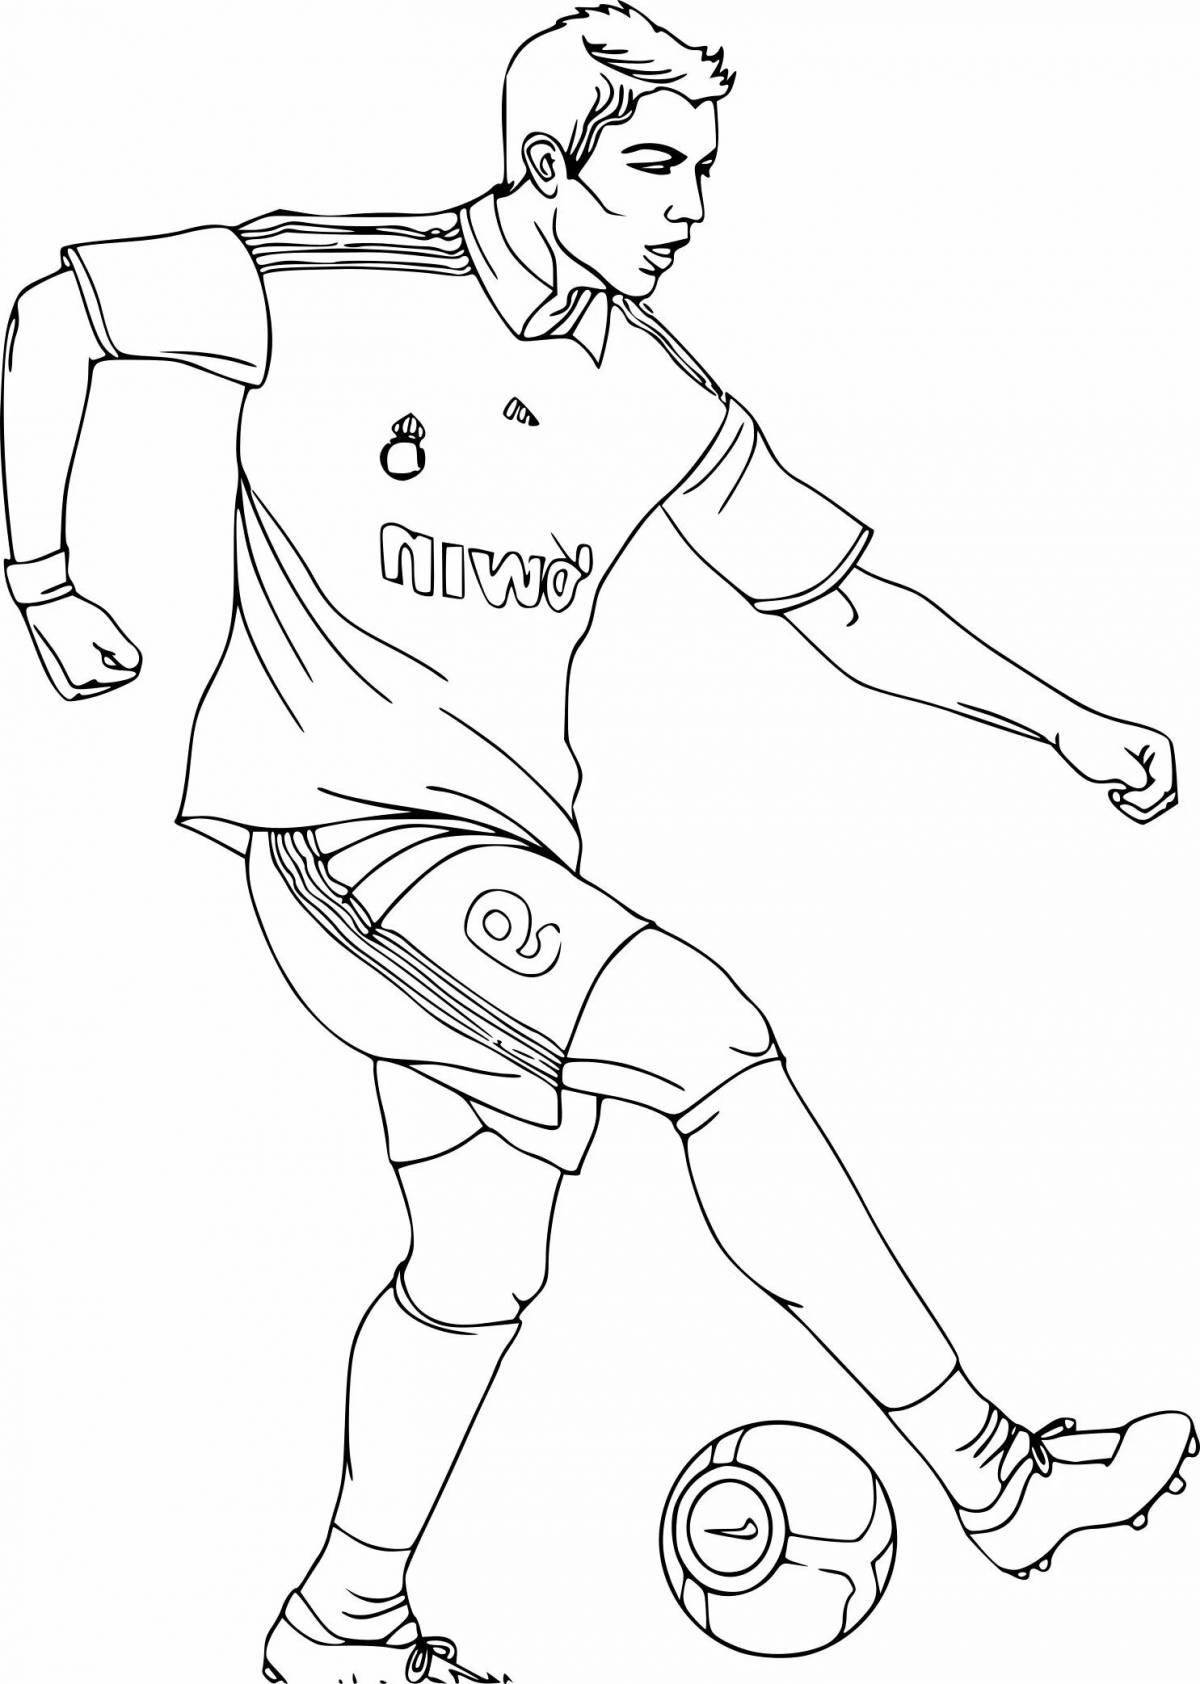 Coloring page powerful football players